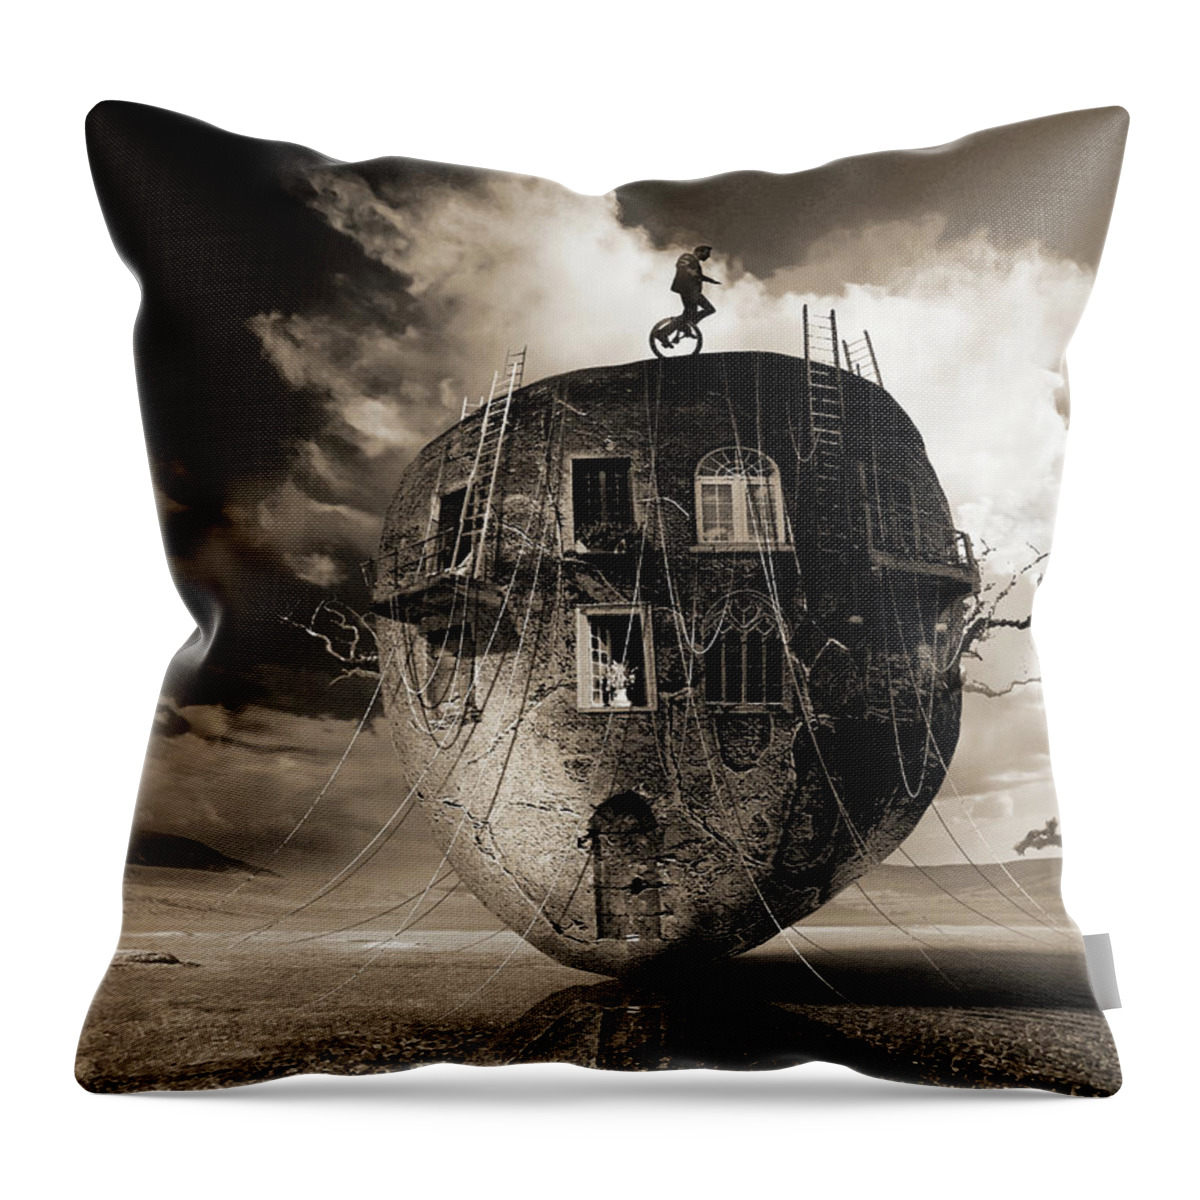 Surrealistic Landscape Rock Mass Windows Exterior Scenery Balcon Throw Pillow featuring the digital art Eyes are windows to the soul by George Grie